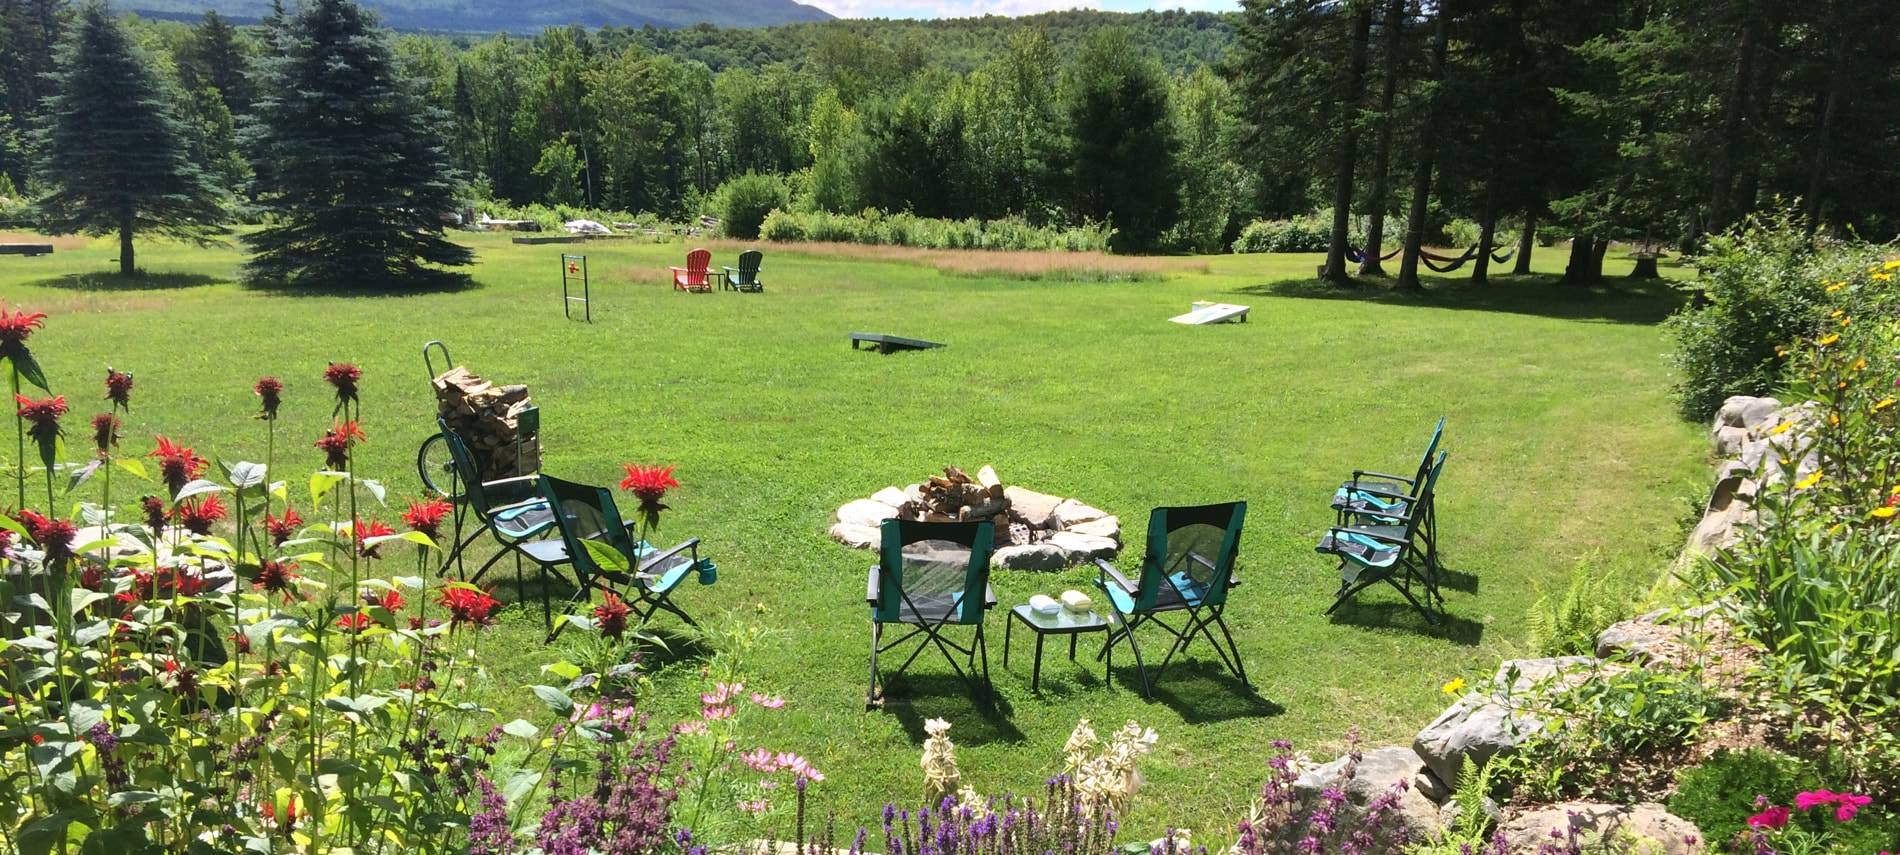 Grassy common area with yard games, chairs, and campfire surrounded by flowers, pine trees and distant hills